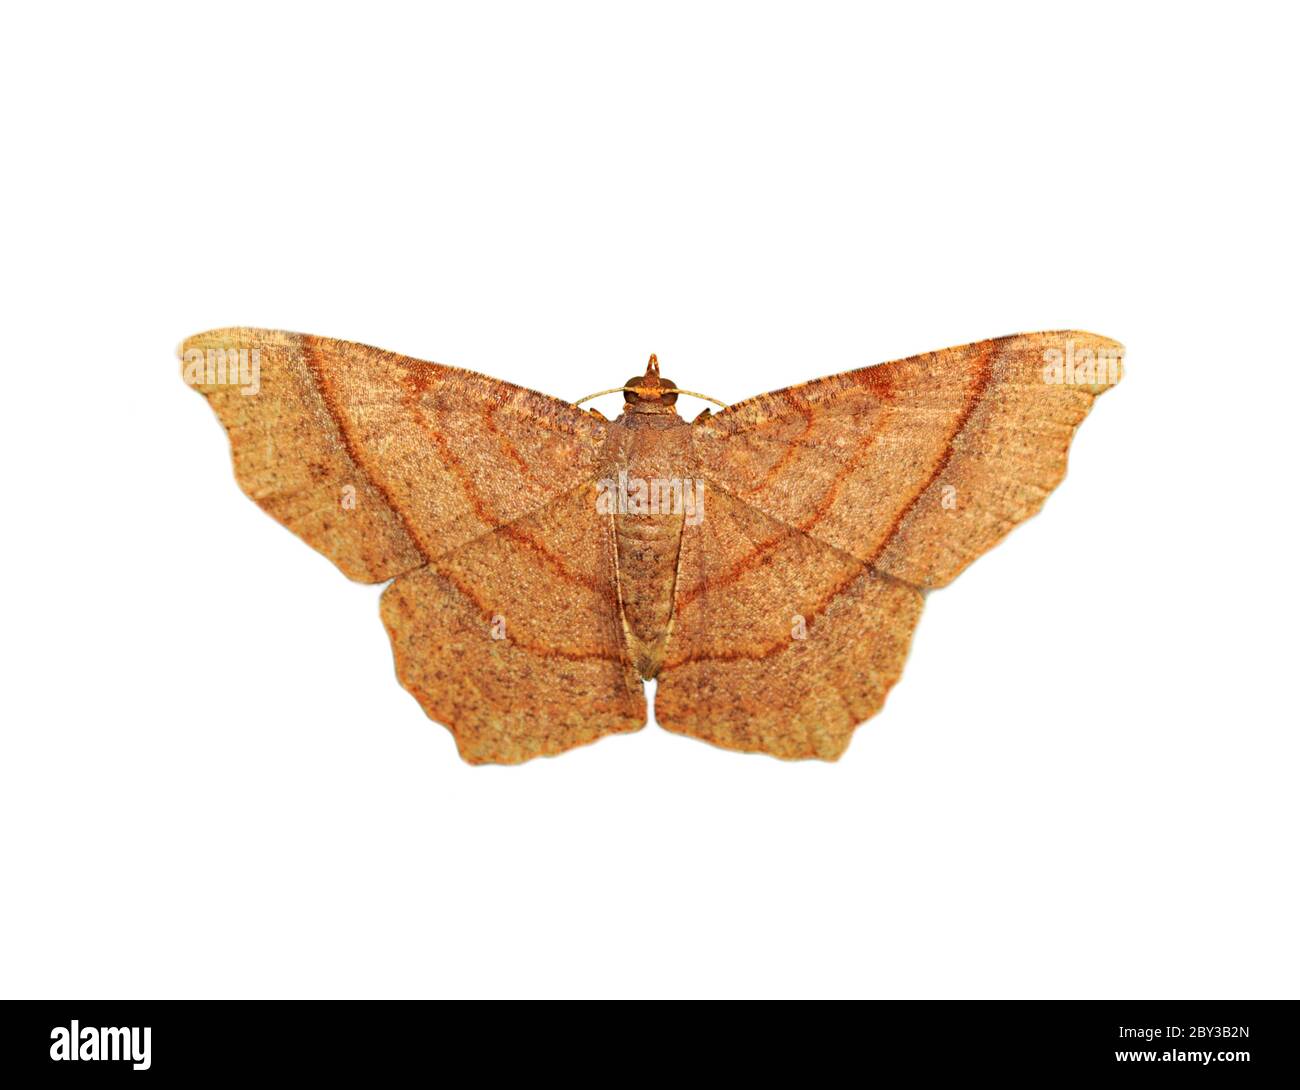 Image of brown butterfly(Moth) isolated on white background. Insect. Animals. Stock Photo